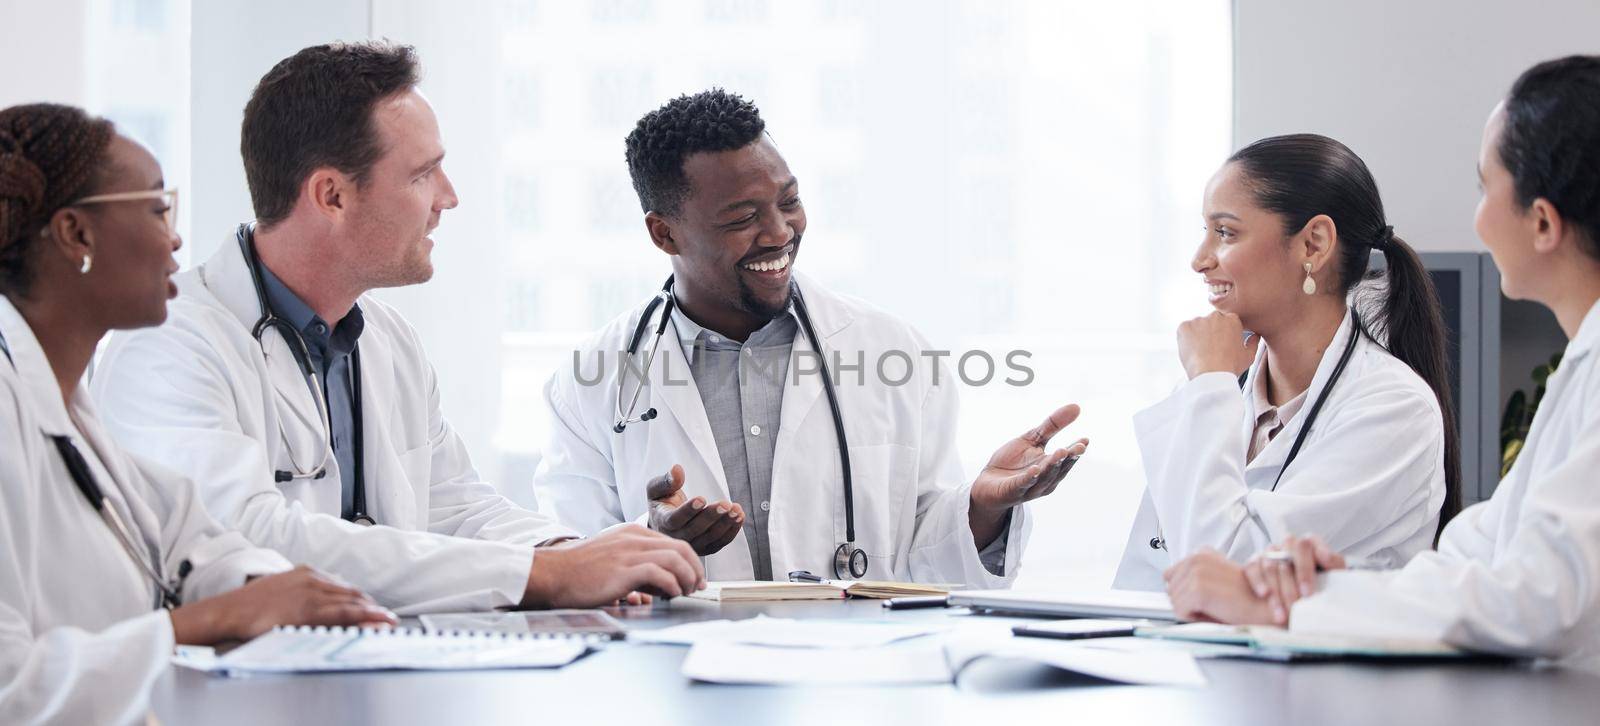 a group of doctors having a staff meeting.